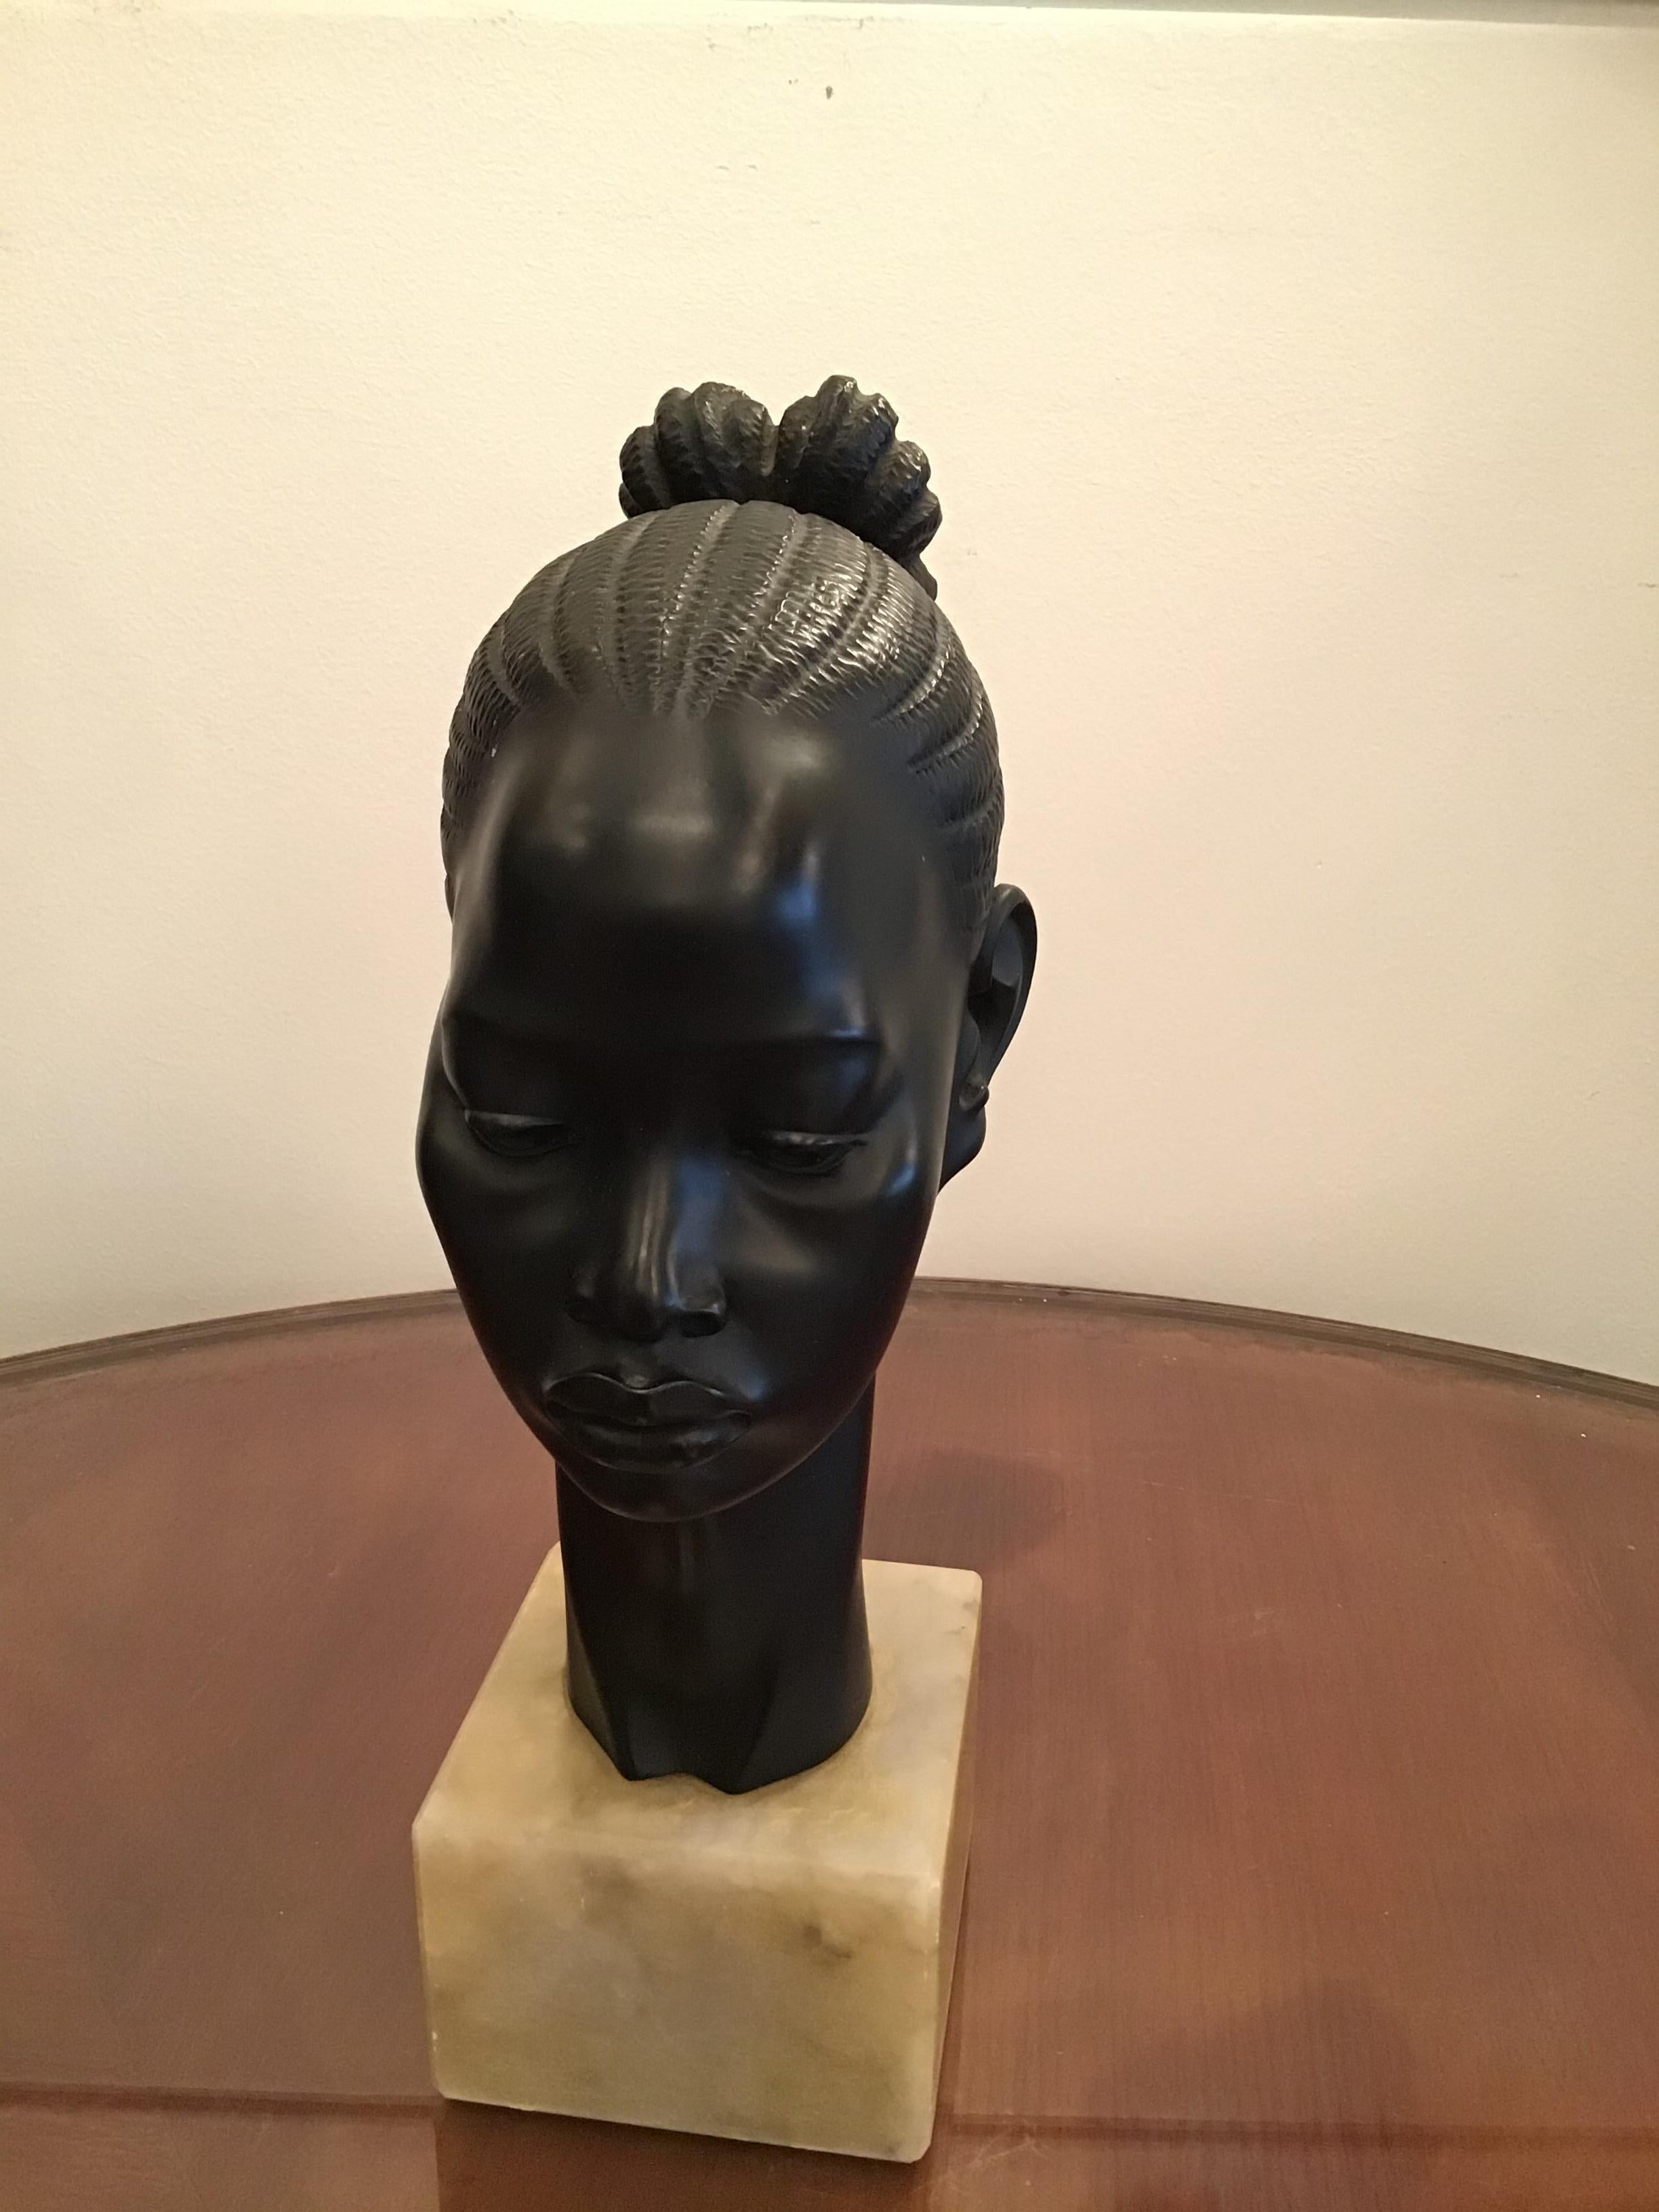 A.Giannelli Sculture “testa di moro” 1950 Mable Resin 1950 Italy For Sale 2